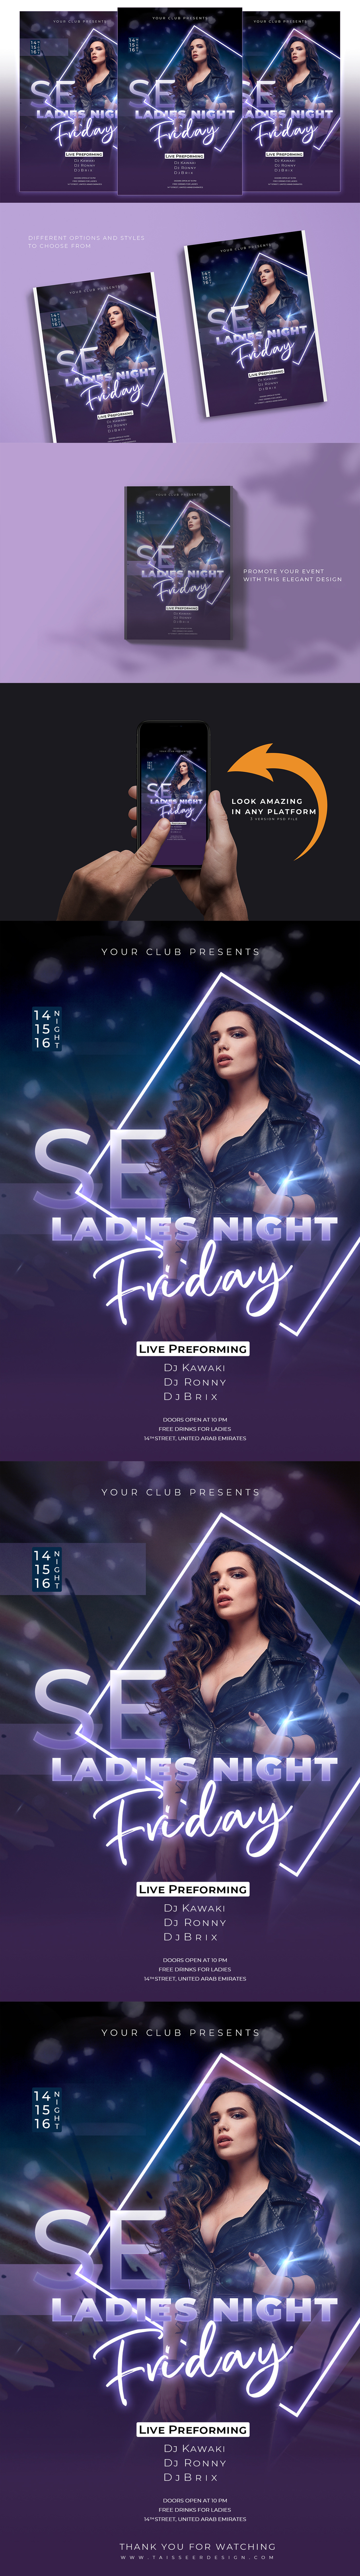 flyer Flyer Design flyer template girls night out instagram Ladies Night night club party night club party flyer party flyer party flyer design